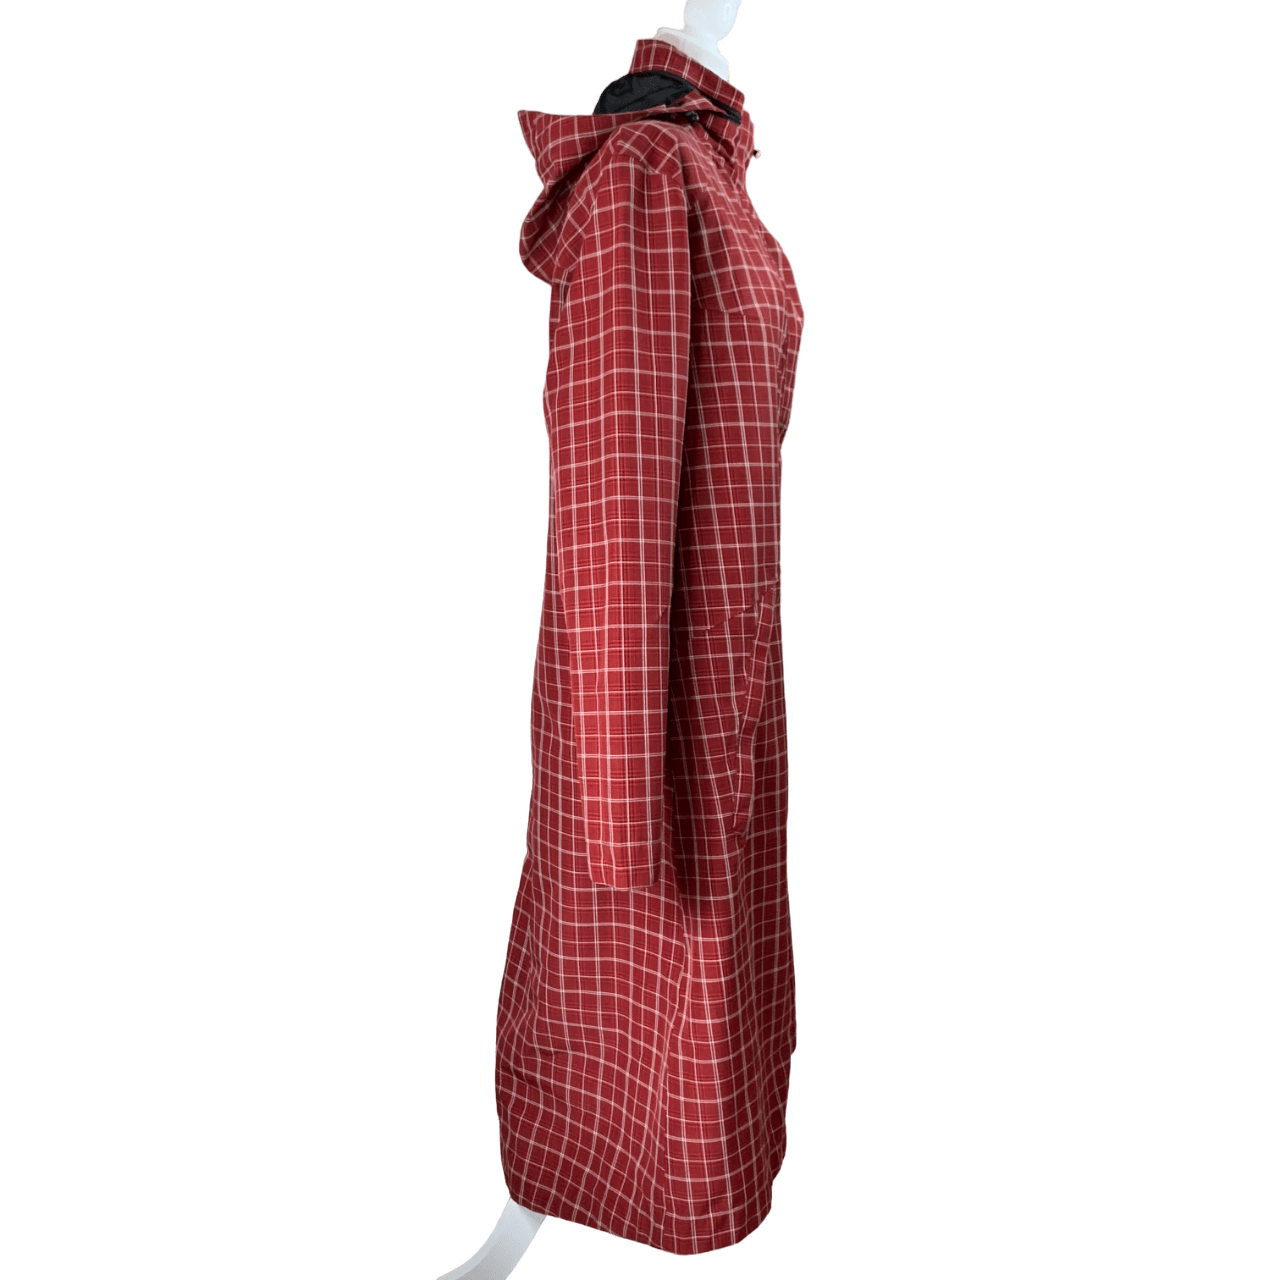 Kerrits Longline Coaches Coat in Red Plaid - Woman's X-Large